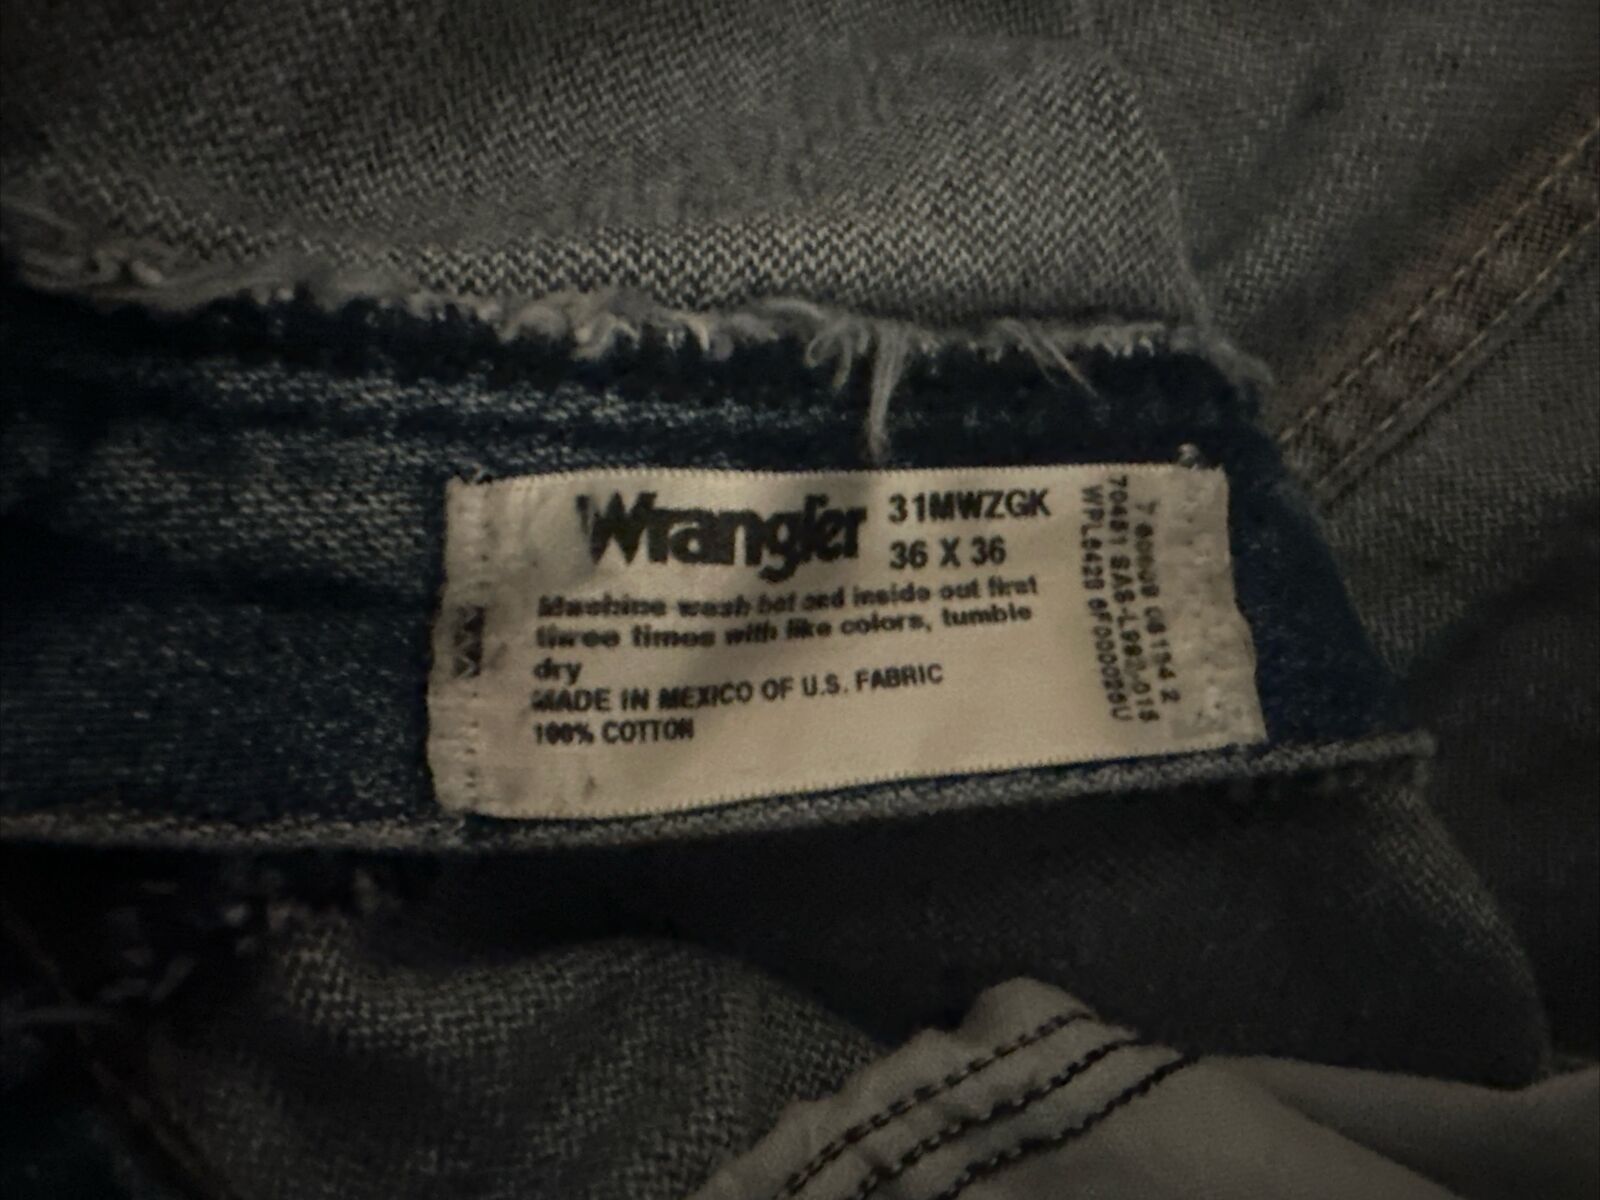 2 Pair Wrangler Relaxed jeans 36x36 - Western Lot - image 4